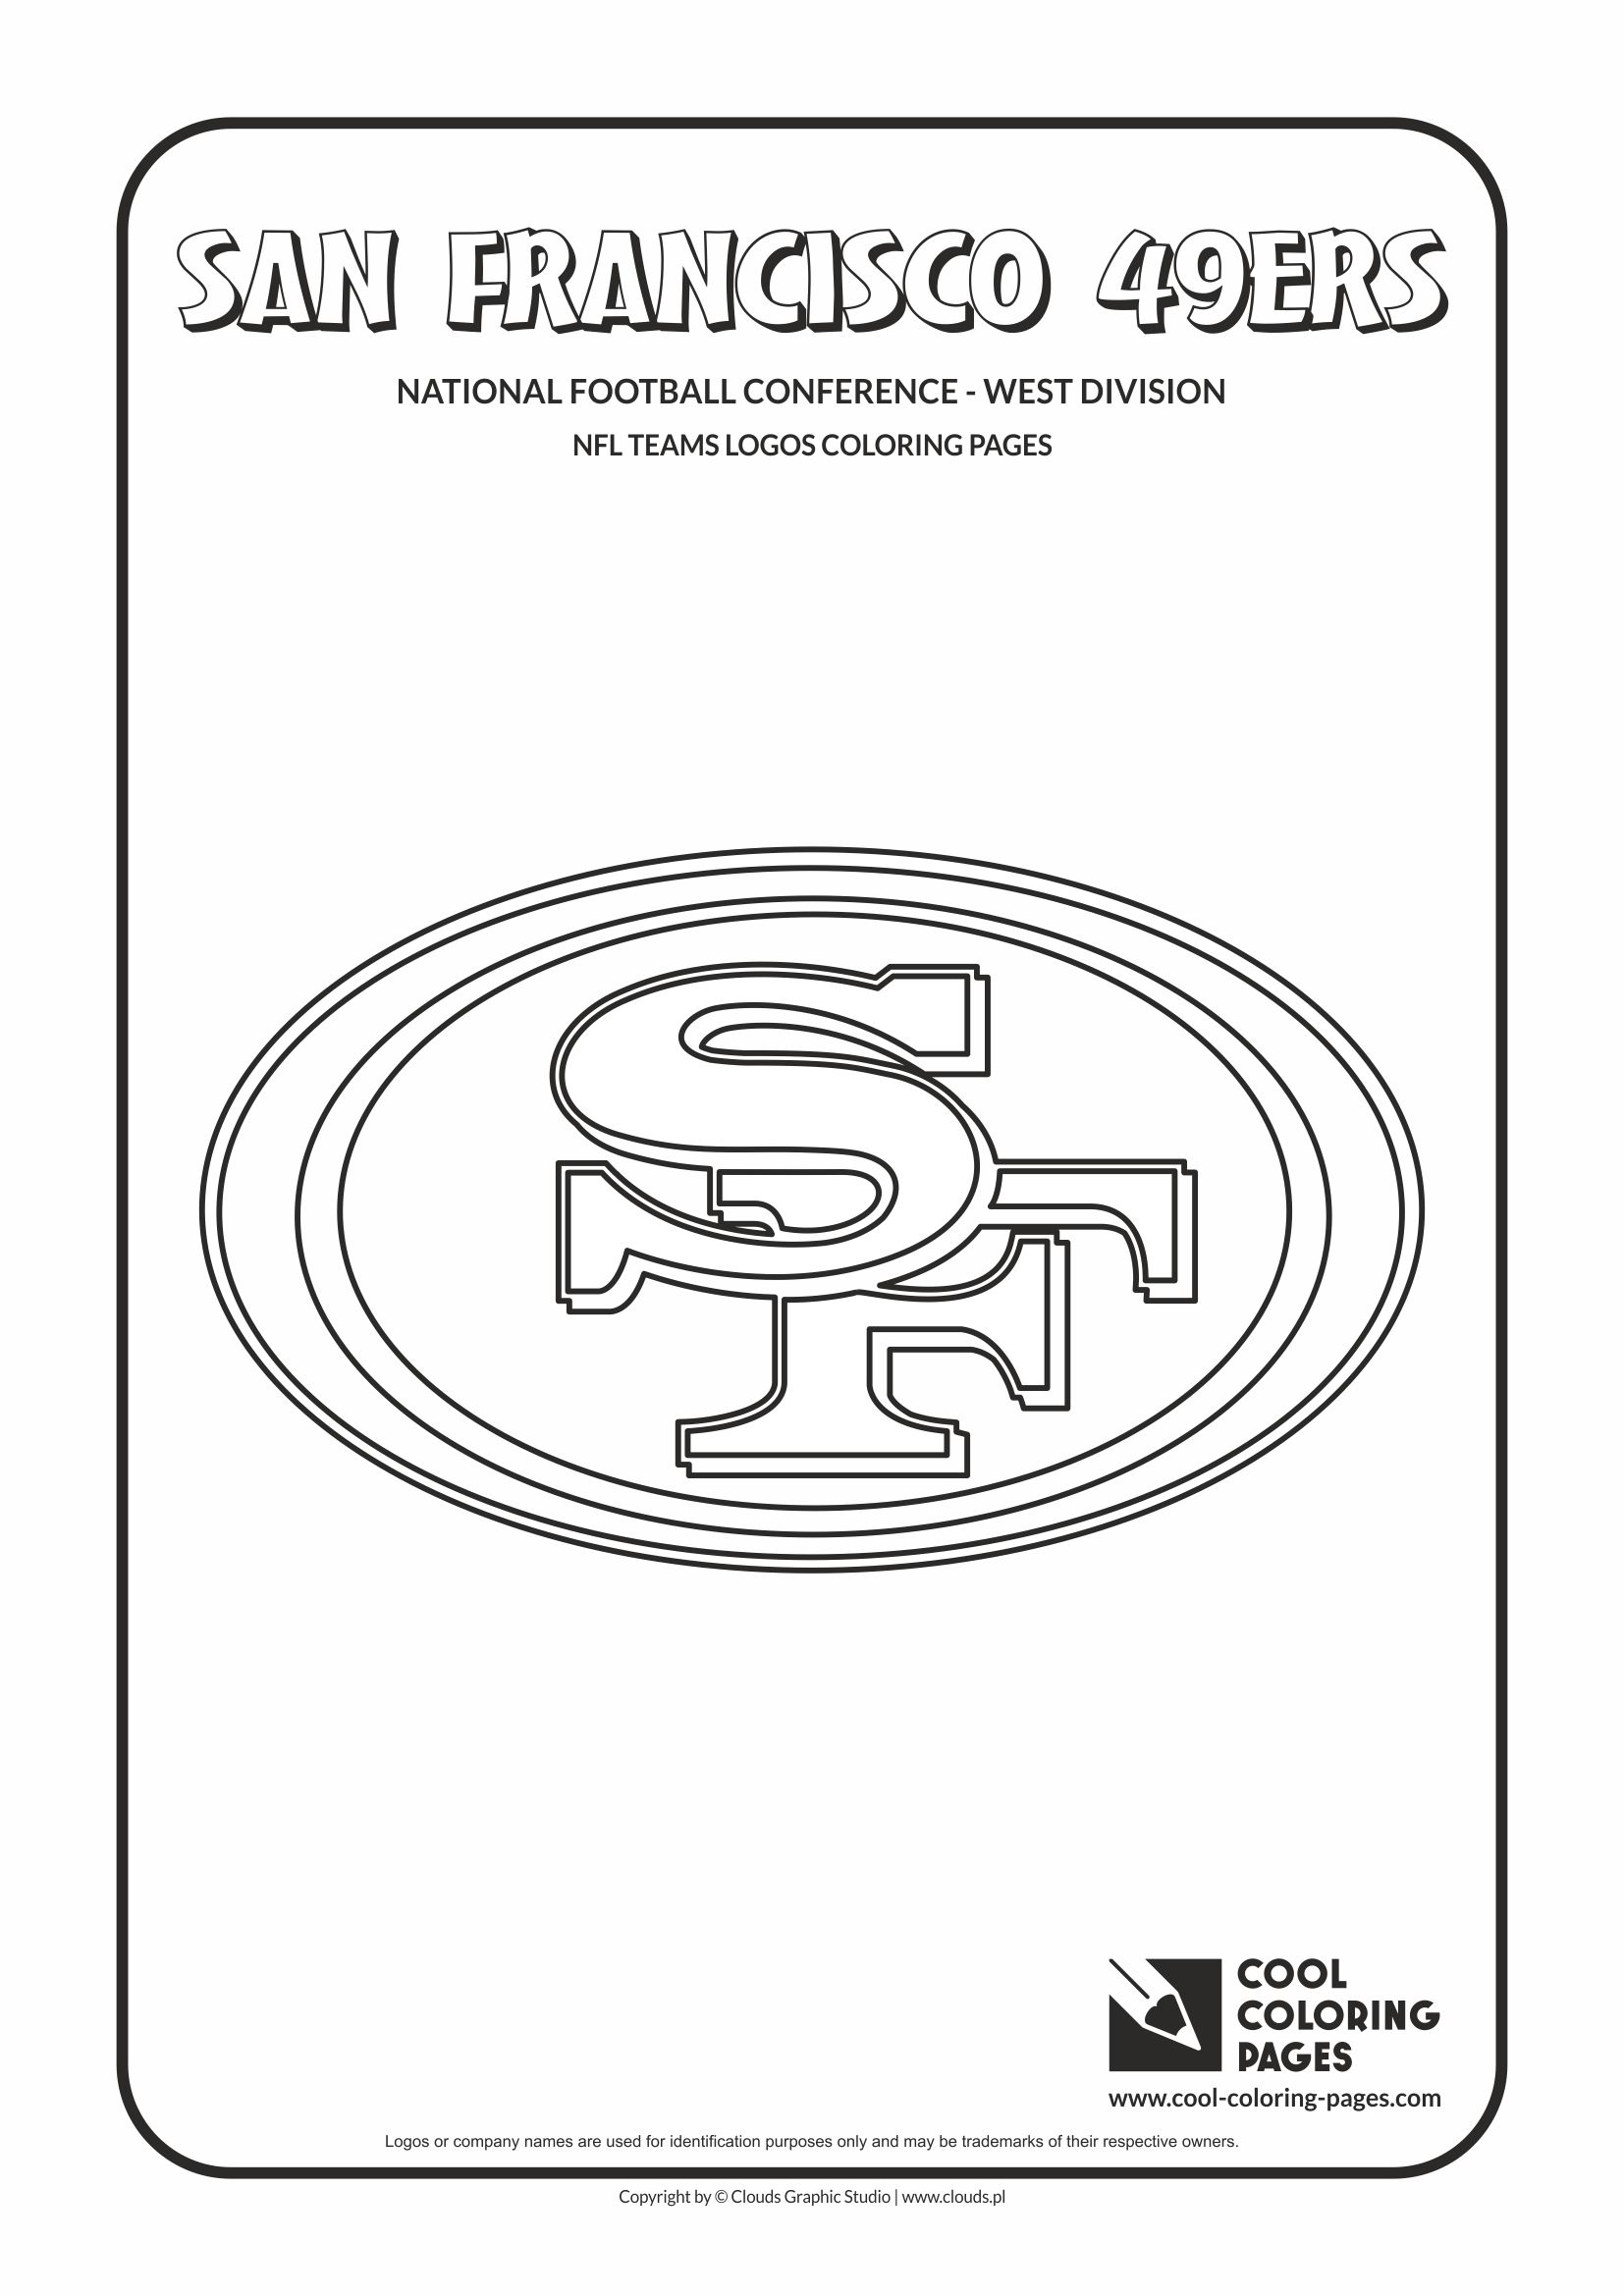 St Louis Cardinals Logo Coloring Page for Kids - Free MLB Printable  Coloring Pages Online for Kids 